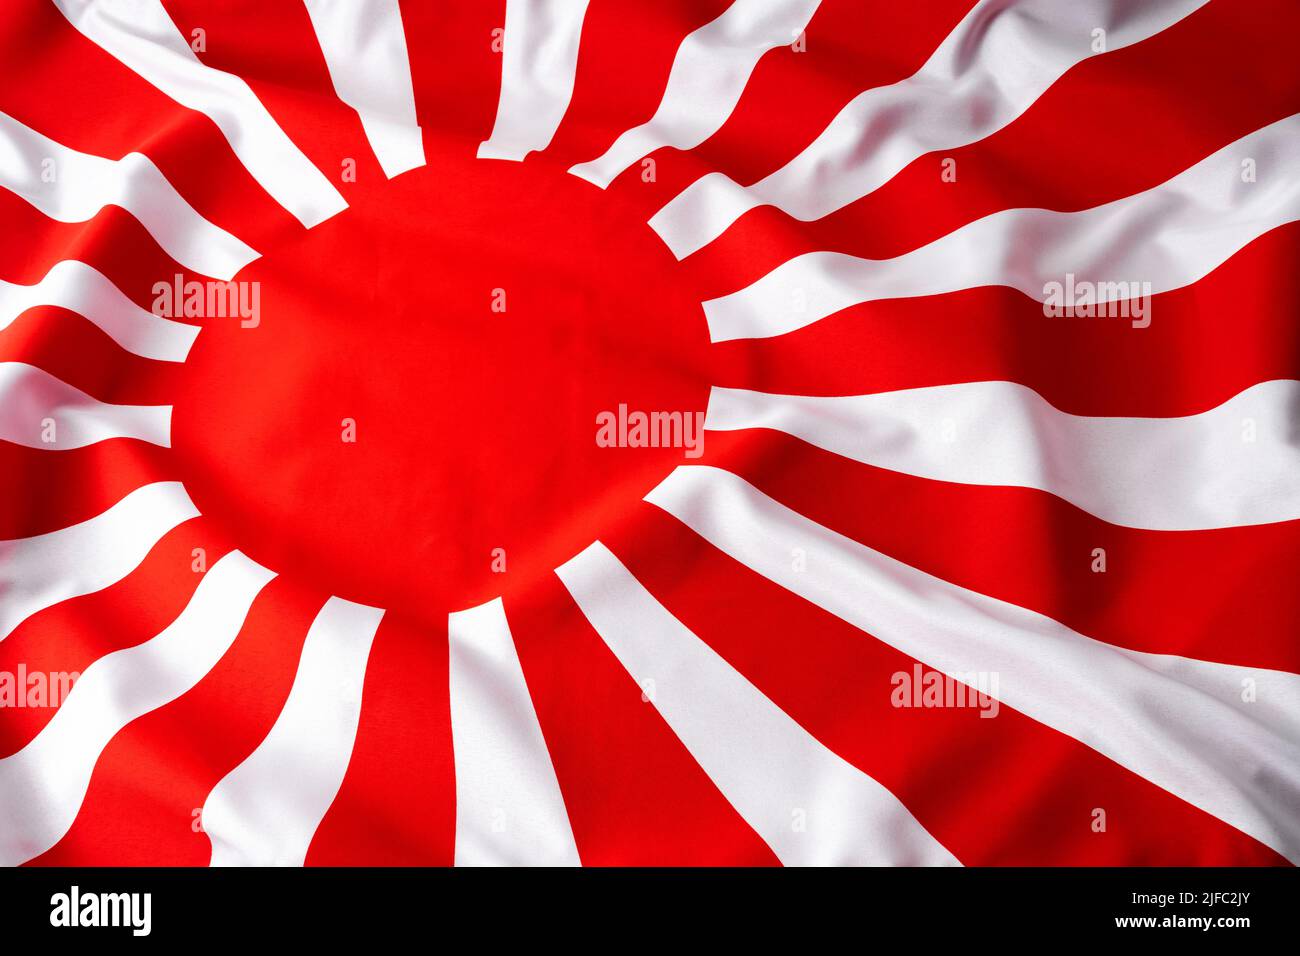 Imperial flag of war world II era Japan with symbolic red rising sun and rays concept for Japanese culture, Asian history and patriotisms backgrounds Stock Photo